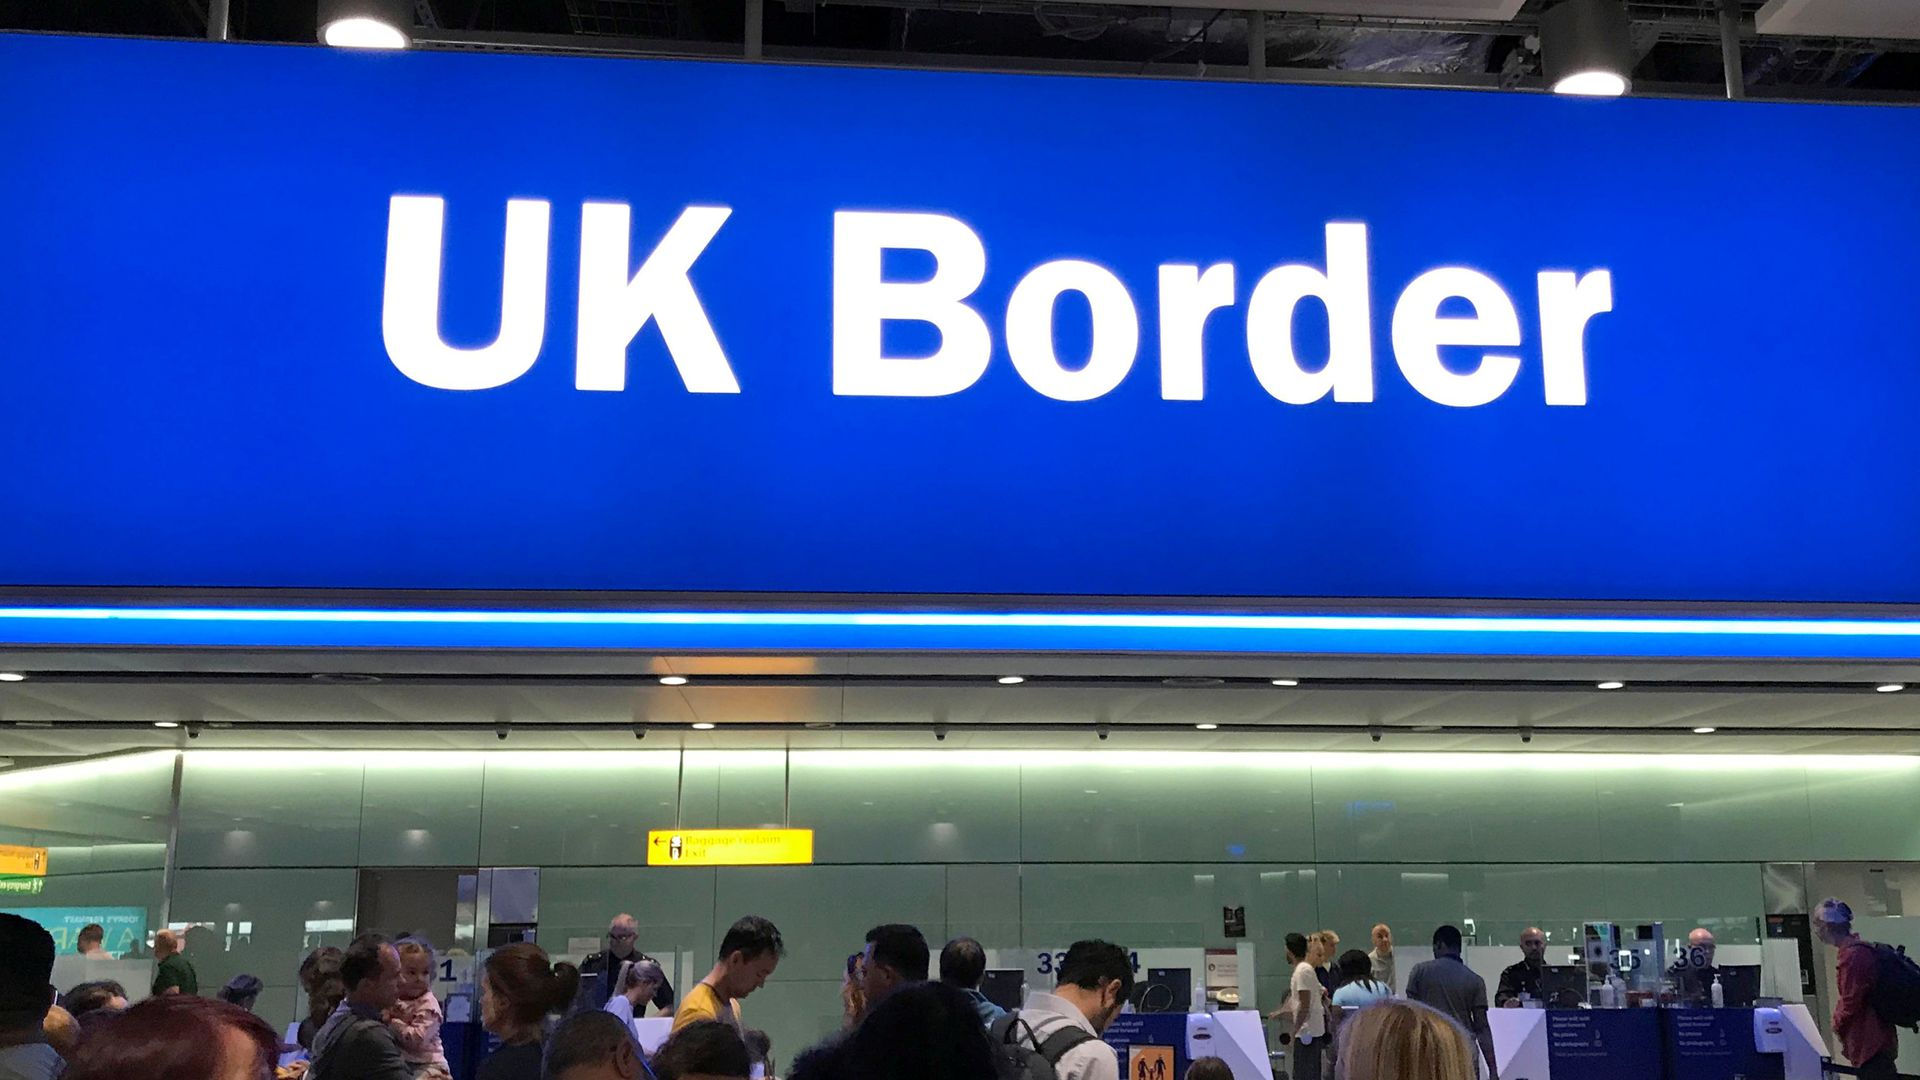 Travel chaos at airports across UK amid nationwide border issue...